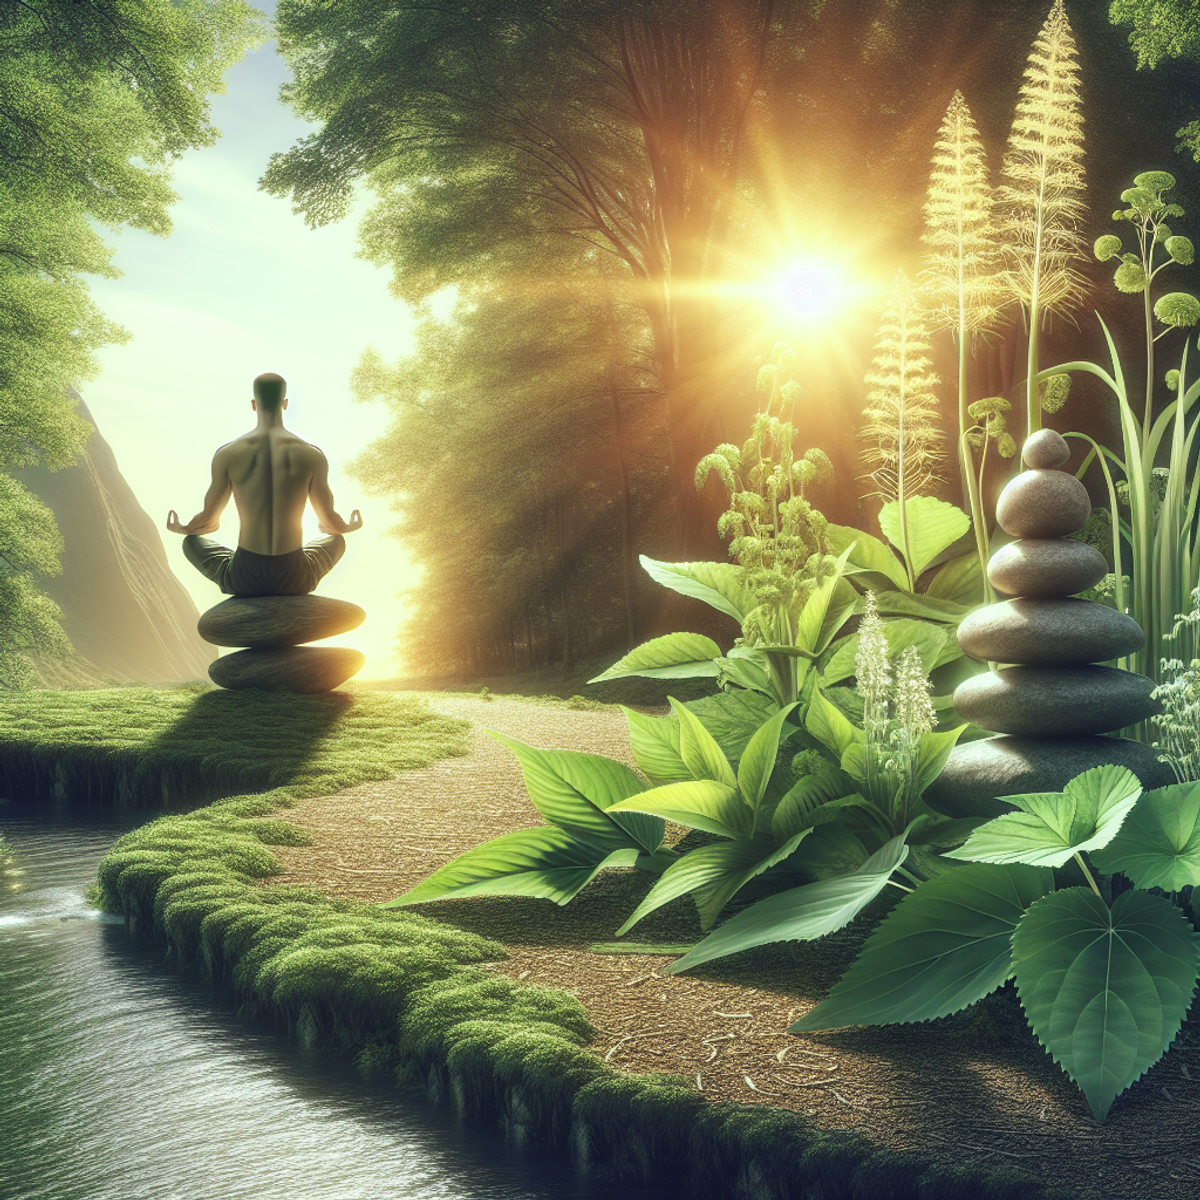 A close-up image of Ashwagandha and Ginseng plants growing in a lush, green environment with sunlight filtering through the leaves. In the background, a serene water body and balanced stone structure symbolize tranquility and resilience. In the foreground, a Caucasian male is meditating, representing a peaceful state of mind.